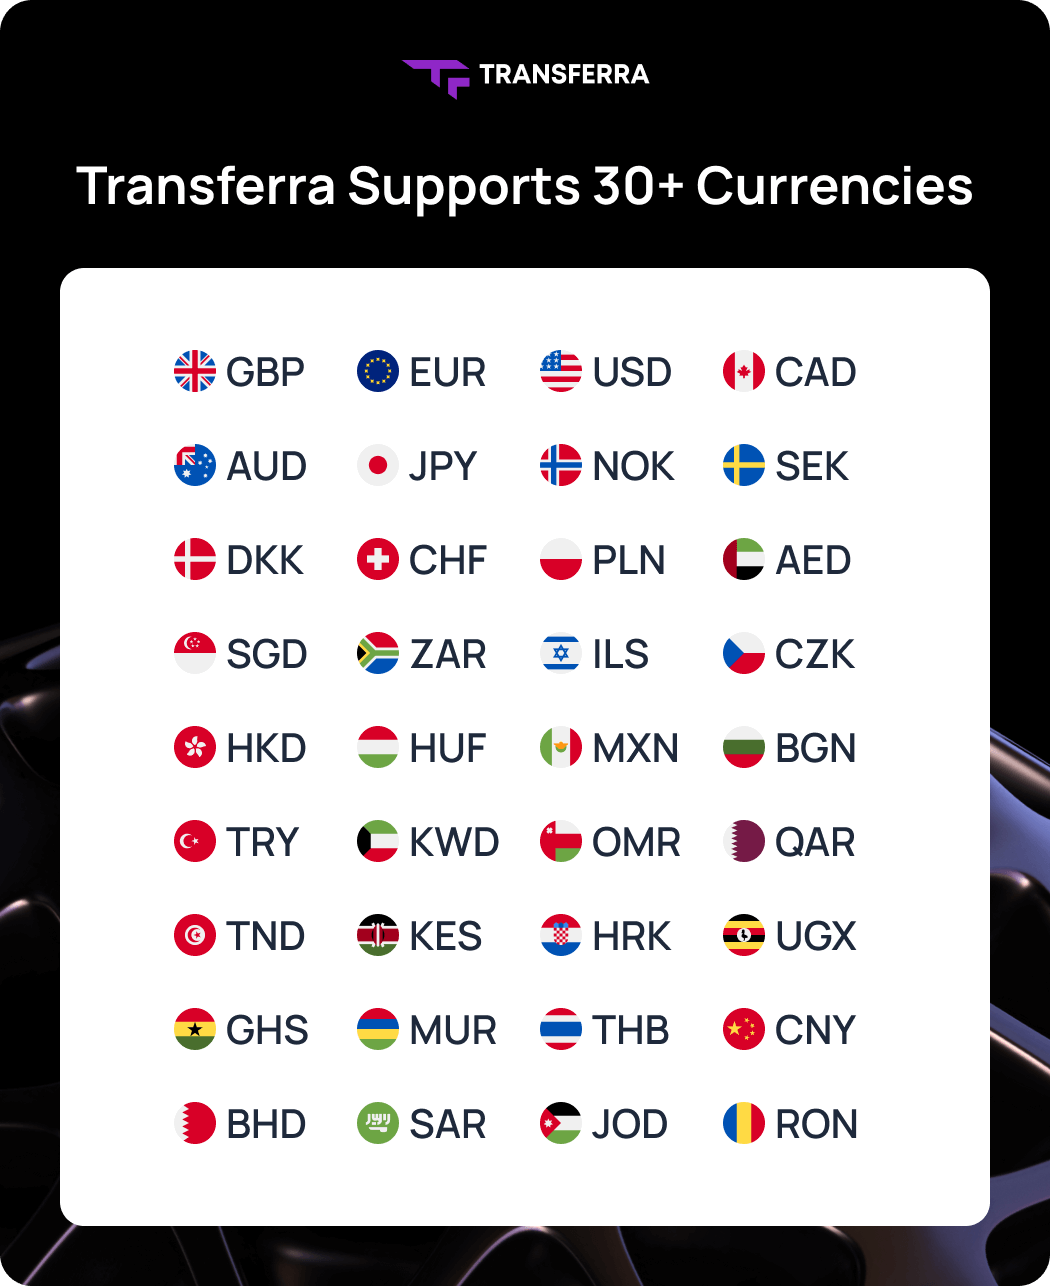 Open a multicurrency business account with Transferra for easy transactions in over 30 currencies across 100+ countries!